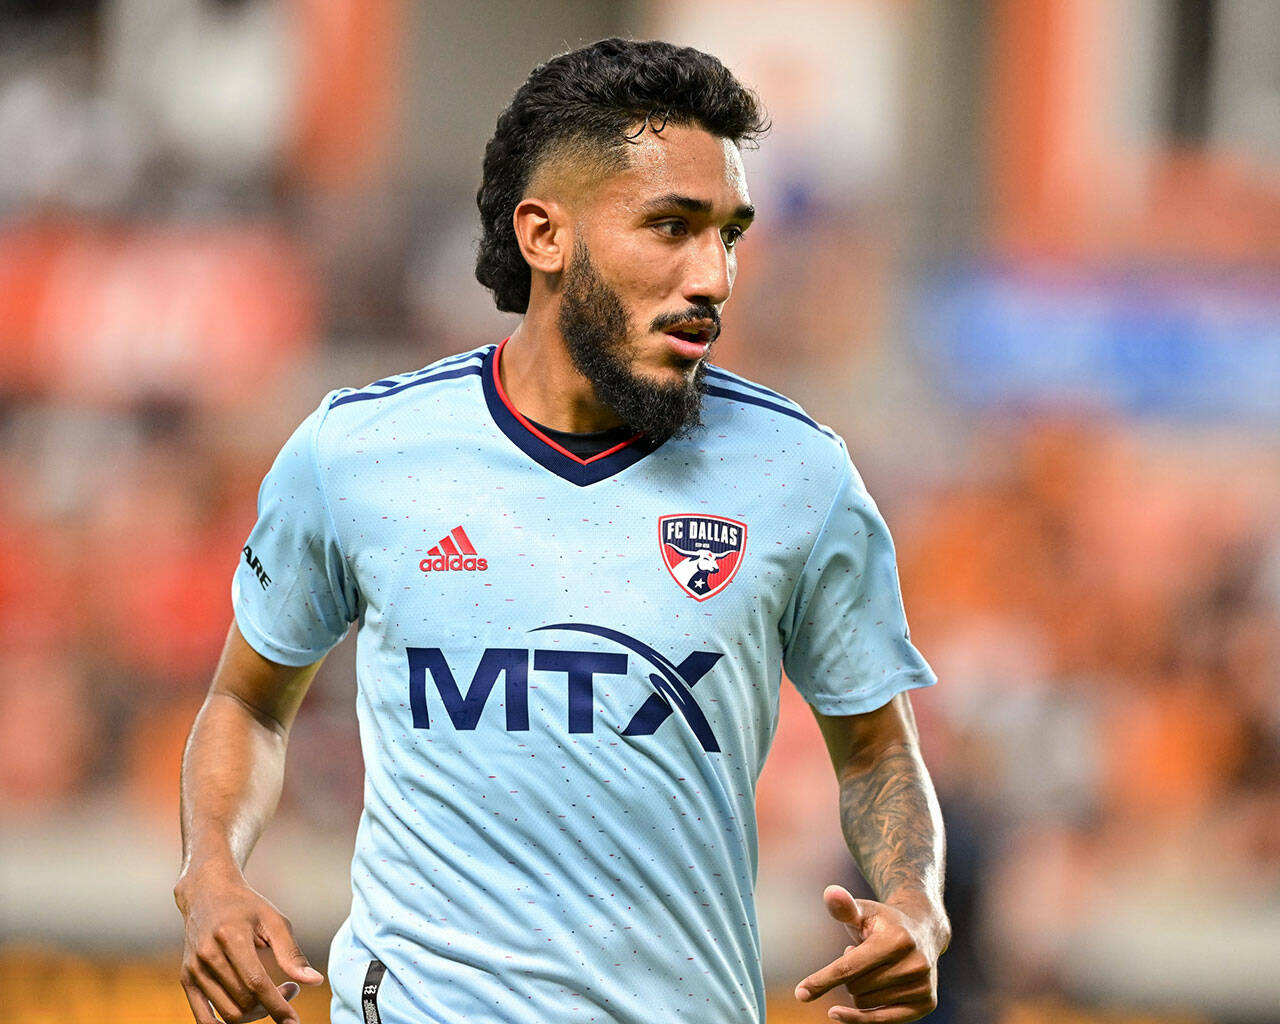 Jul 9, 2022; Houston, Texas, USA; FC Dallas forward Jesus Ferreira (10) in action during the first half against the Houston Dynamo FC at PNC Stadium. Mandatory Credit: Maria Lysaker-Houston Dynamo FC-USA TODAY Sports